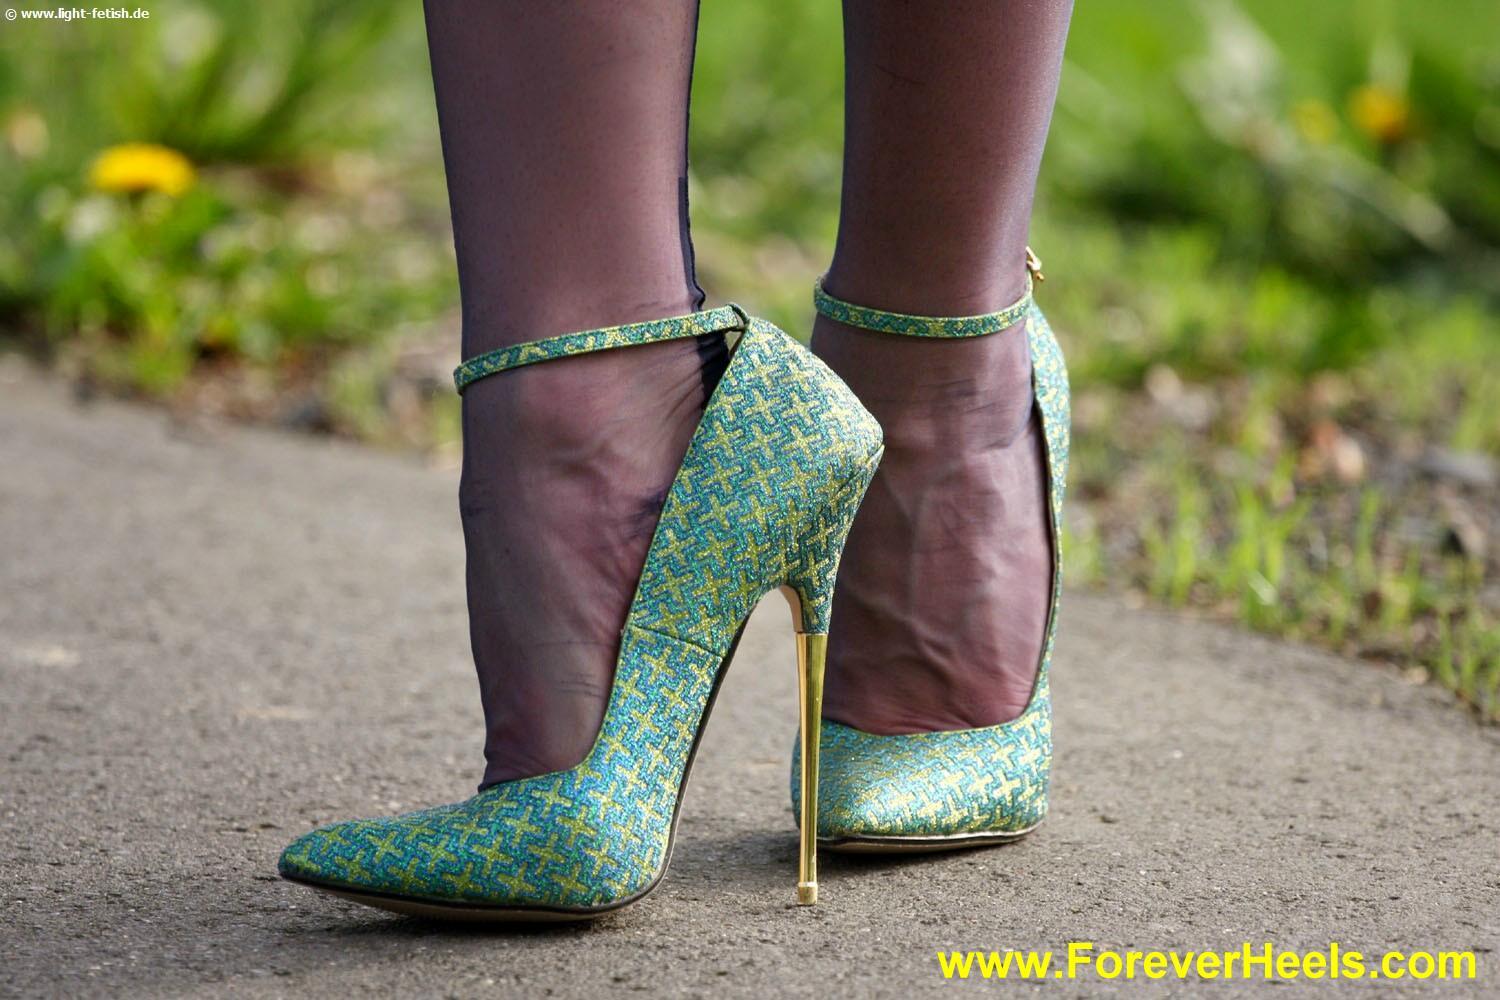 Peter Chu Shoes 6 Inch Heels Forever (ForeverHeels.com) - Home